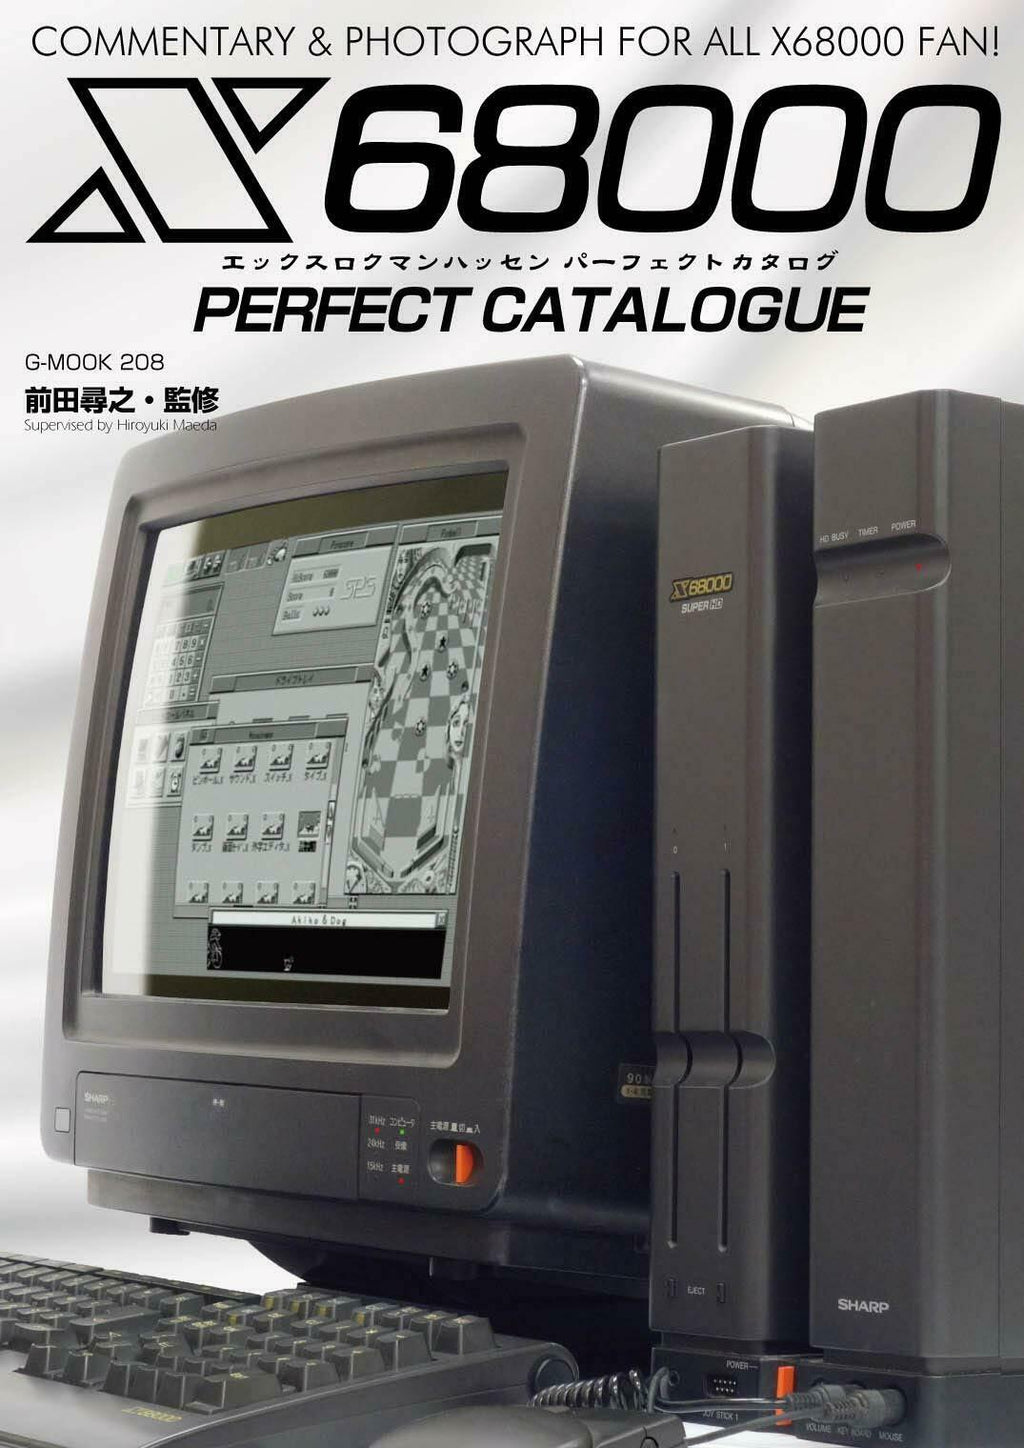 NEW X68000 Perfect Catalogue | JAPAN Game Fan Book